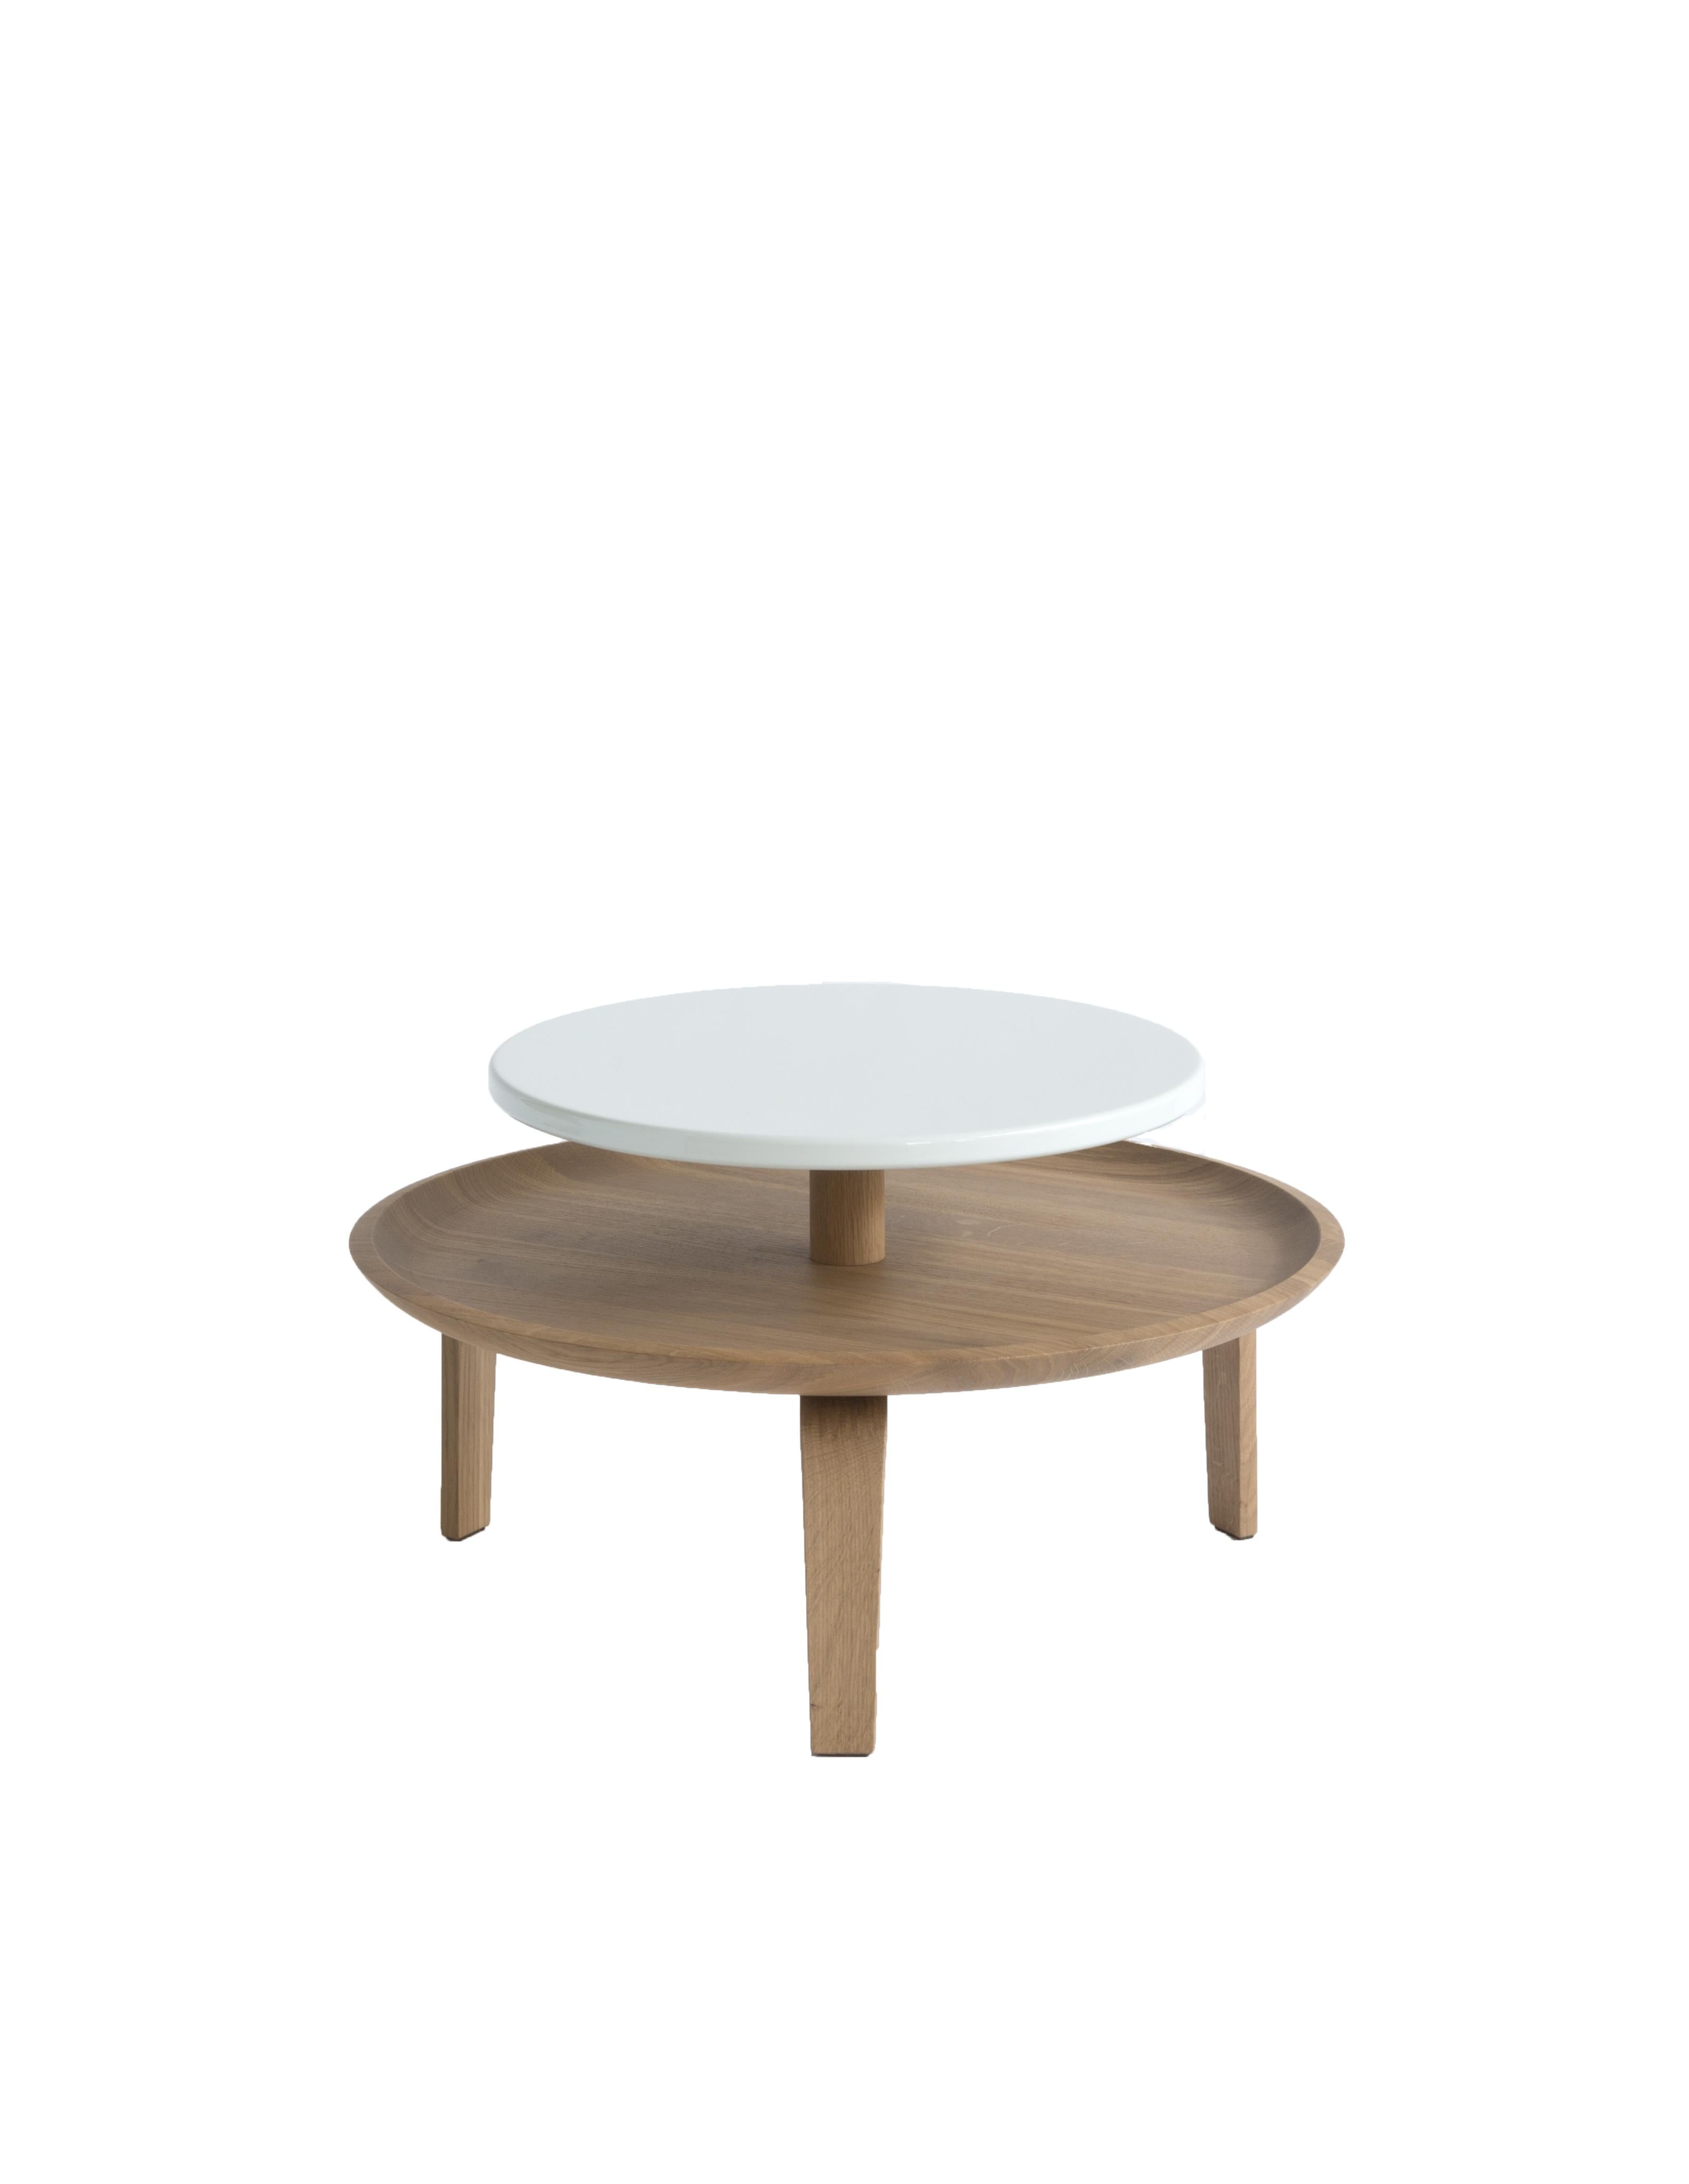 Secreto 60 coffee tble, white, “Nuit de Noel” by Colé Italia
Dimensions: H.32; base plate ø 60 top ø 45 cm
Materials: Coach table with 2 rounded plates; 3 legs and base plate in natural solid oak;
top matt lacquered in 5 colors.

Also